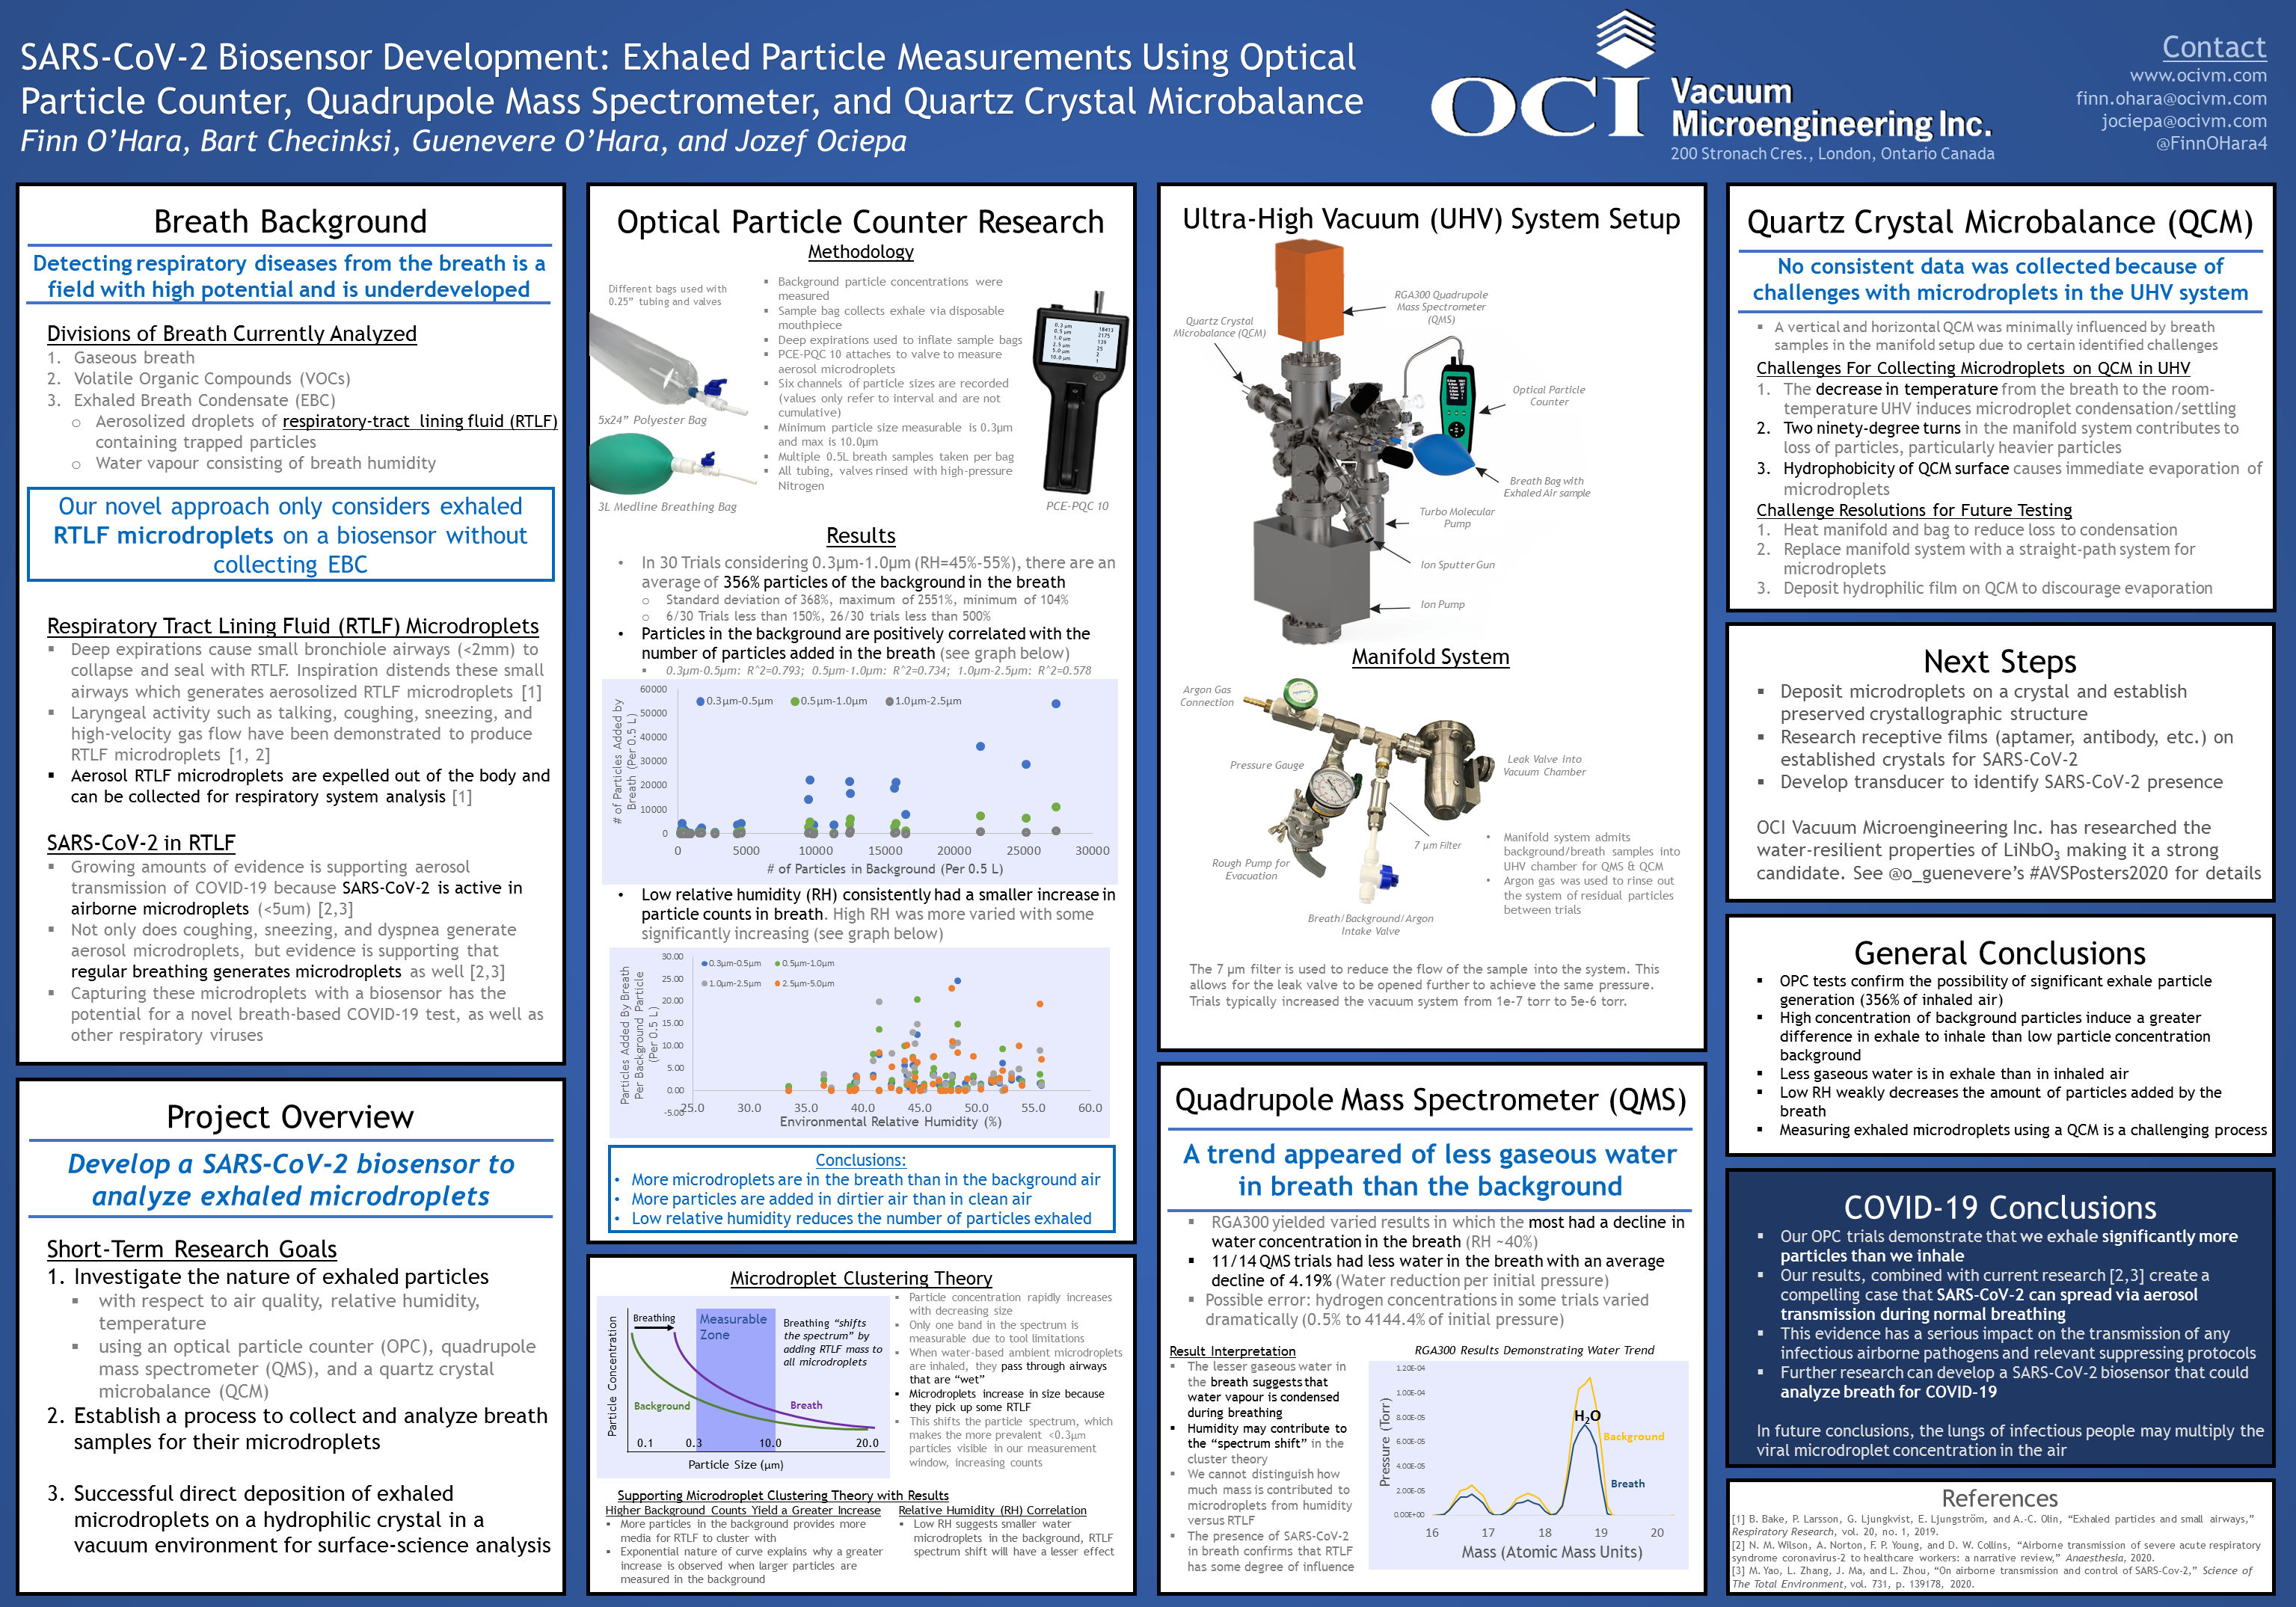 SARS CoV-2 Biosensor Development: Exhaled Particle Measurements Using Optical Particle Counter, Quadrupole Mass Spectrometer, and Quartz Crystal Microbalance by Finn O'Hara, Bart Checinski, Guenereve O'Hara, and Jozef Ociepa. Follow one of the links above to download the PDF version.